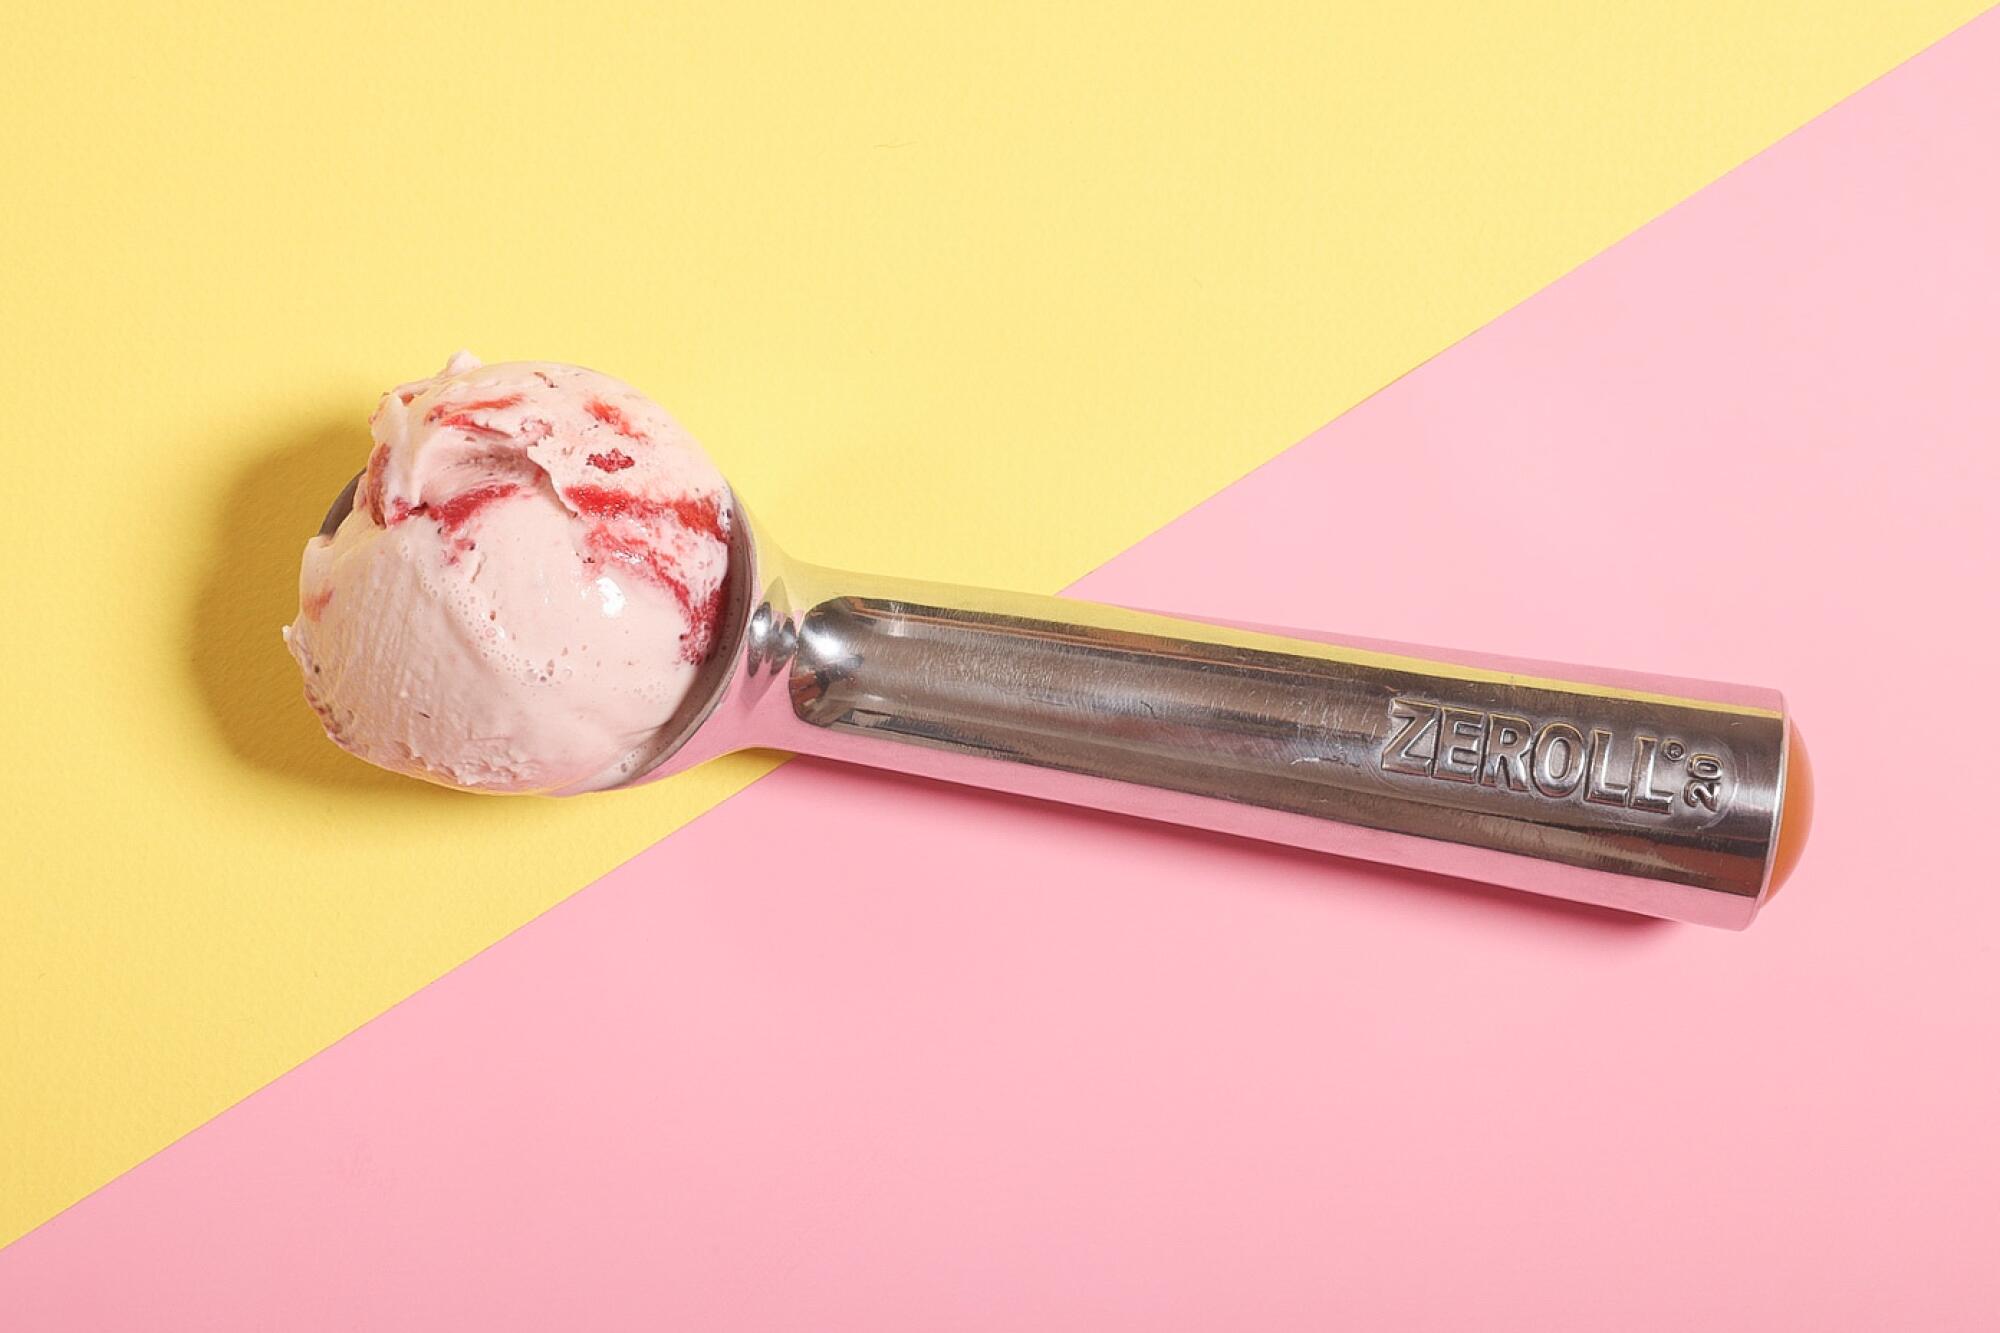 The Zeroll ice cream scoop holds a helping of the frozen treat on a yellow and pink background